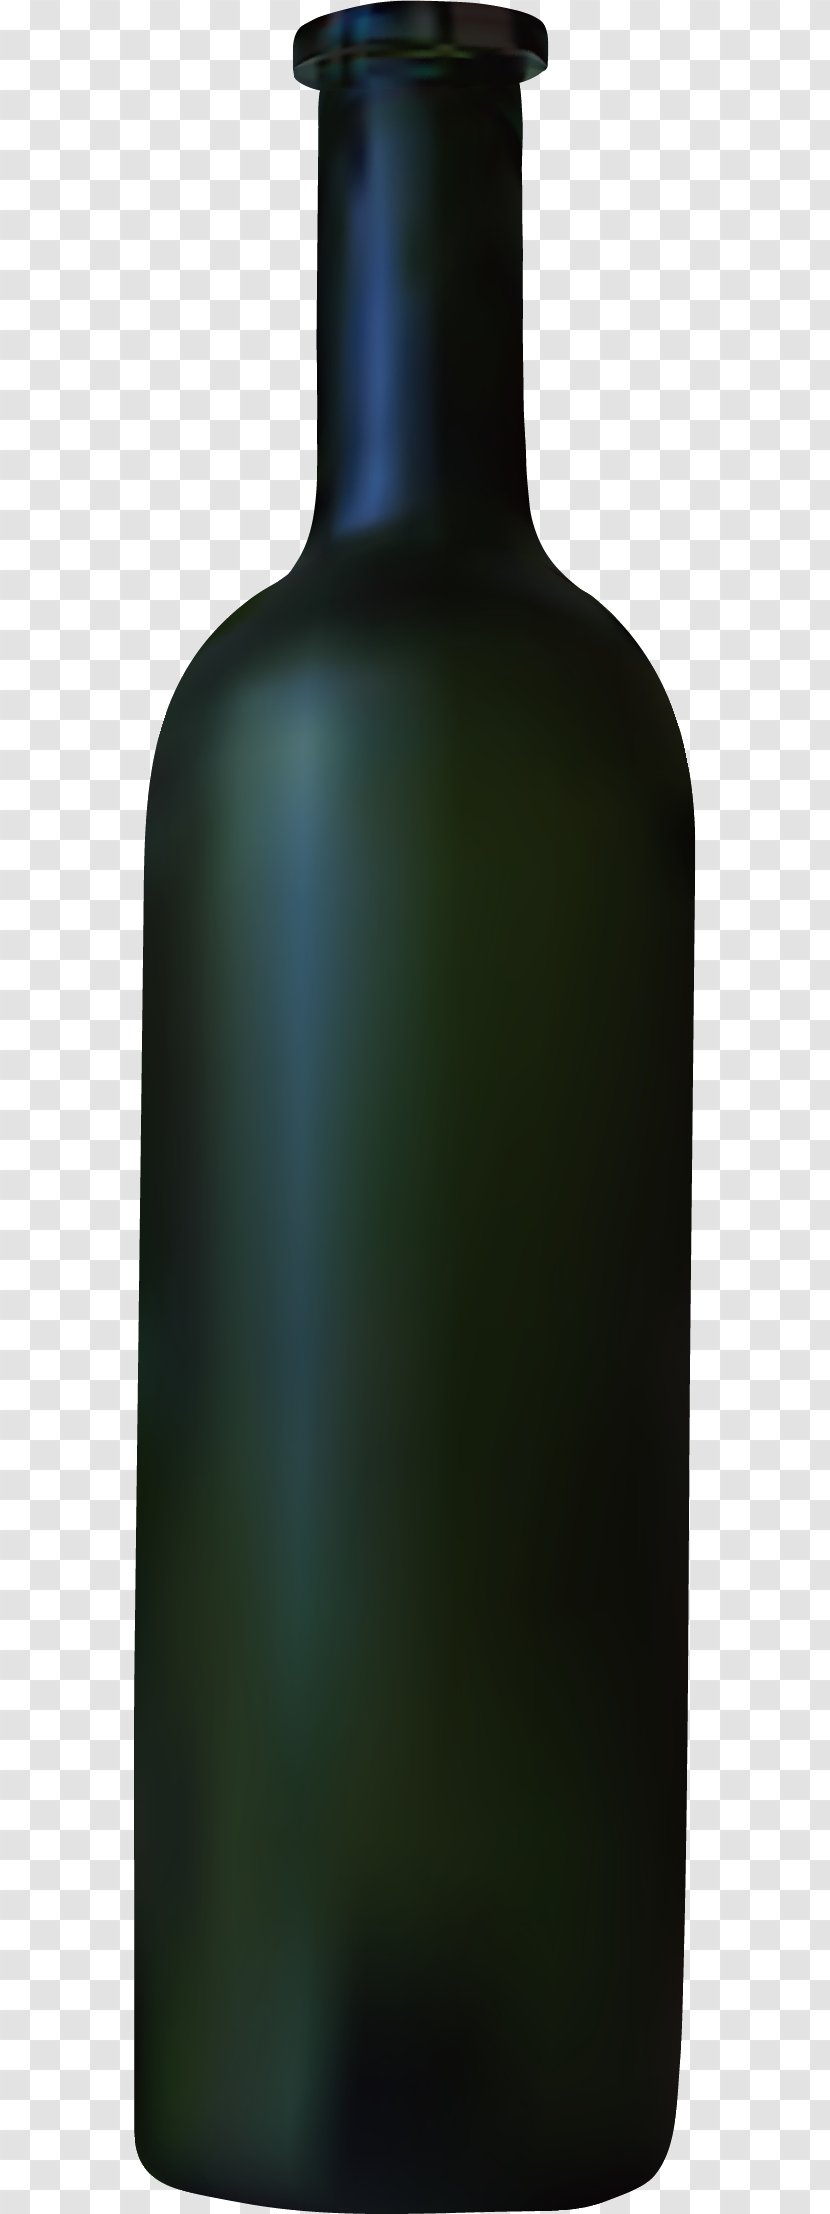 Red Wine Glass Bottle Juice - A Transparent PNG